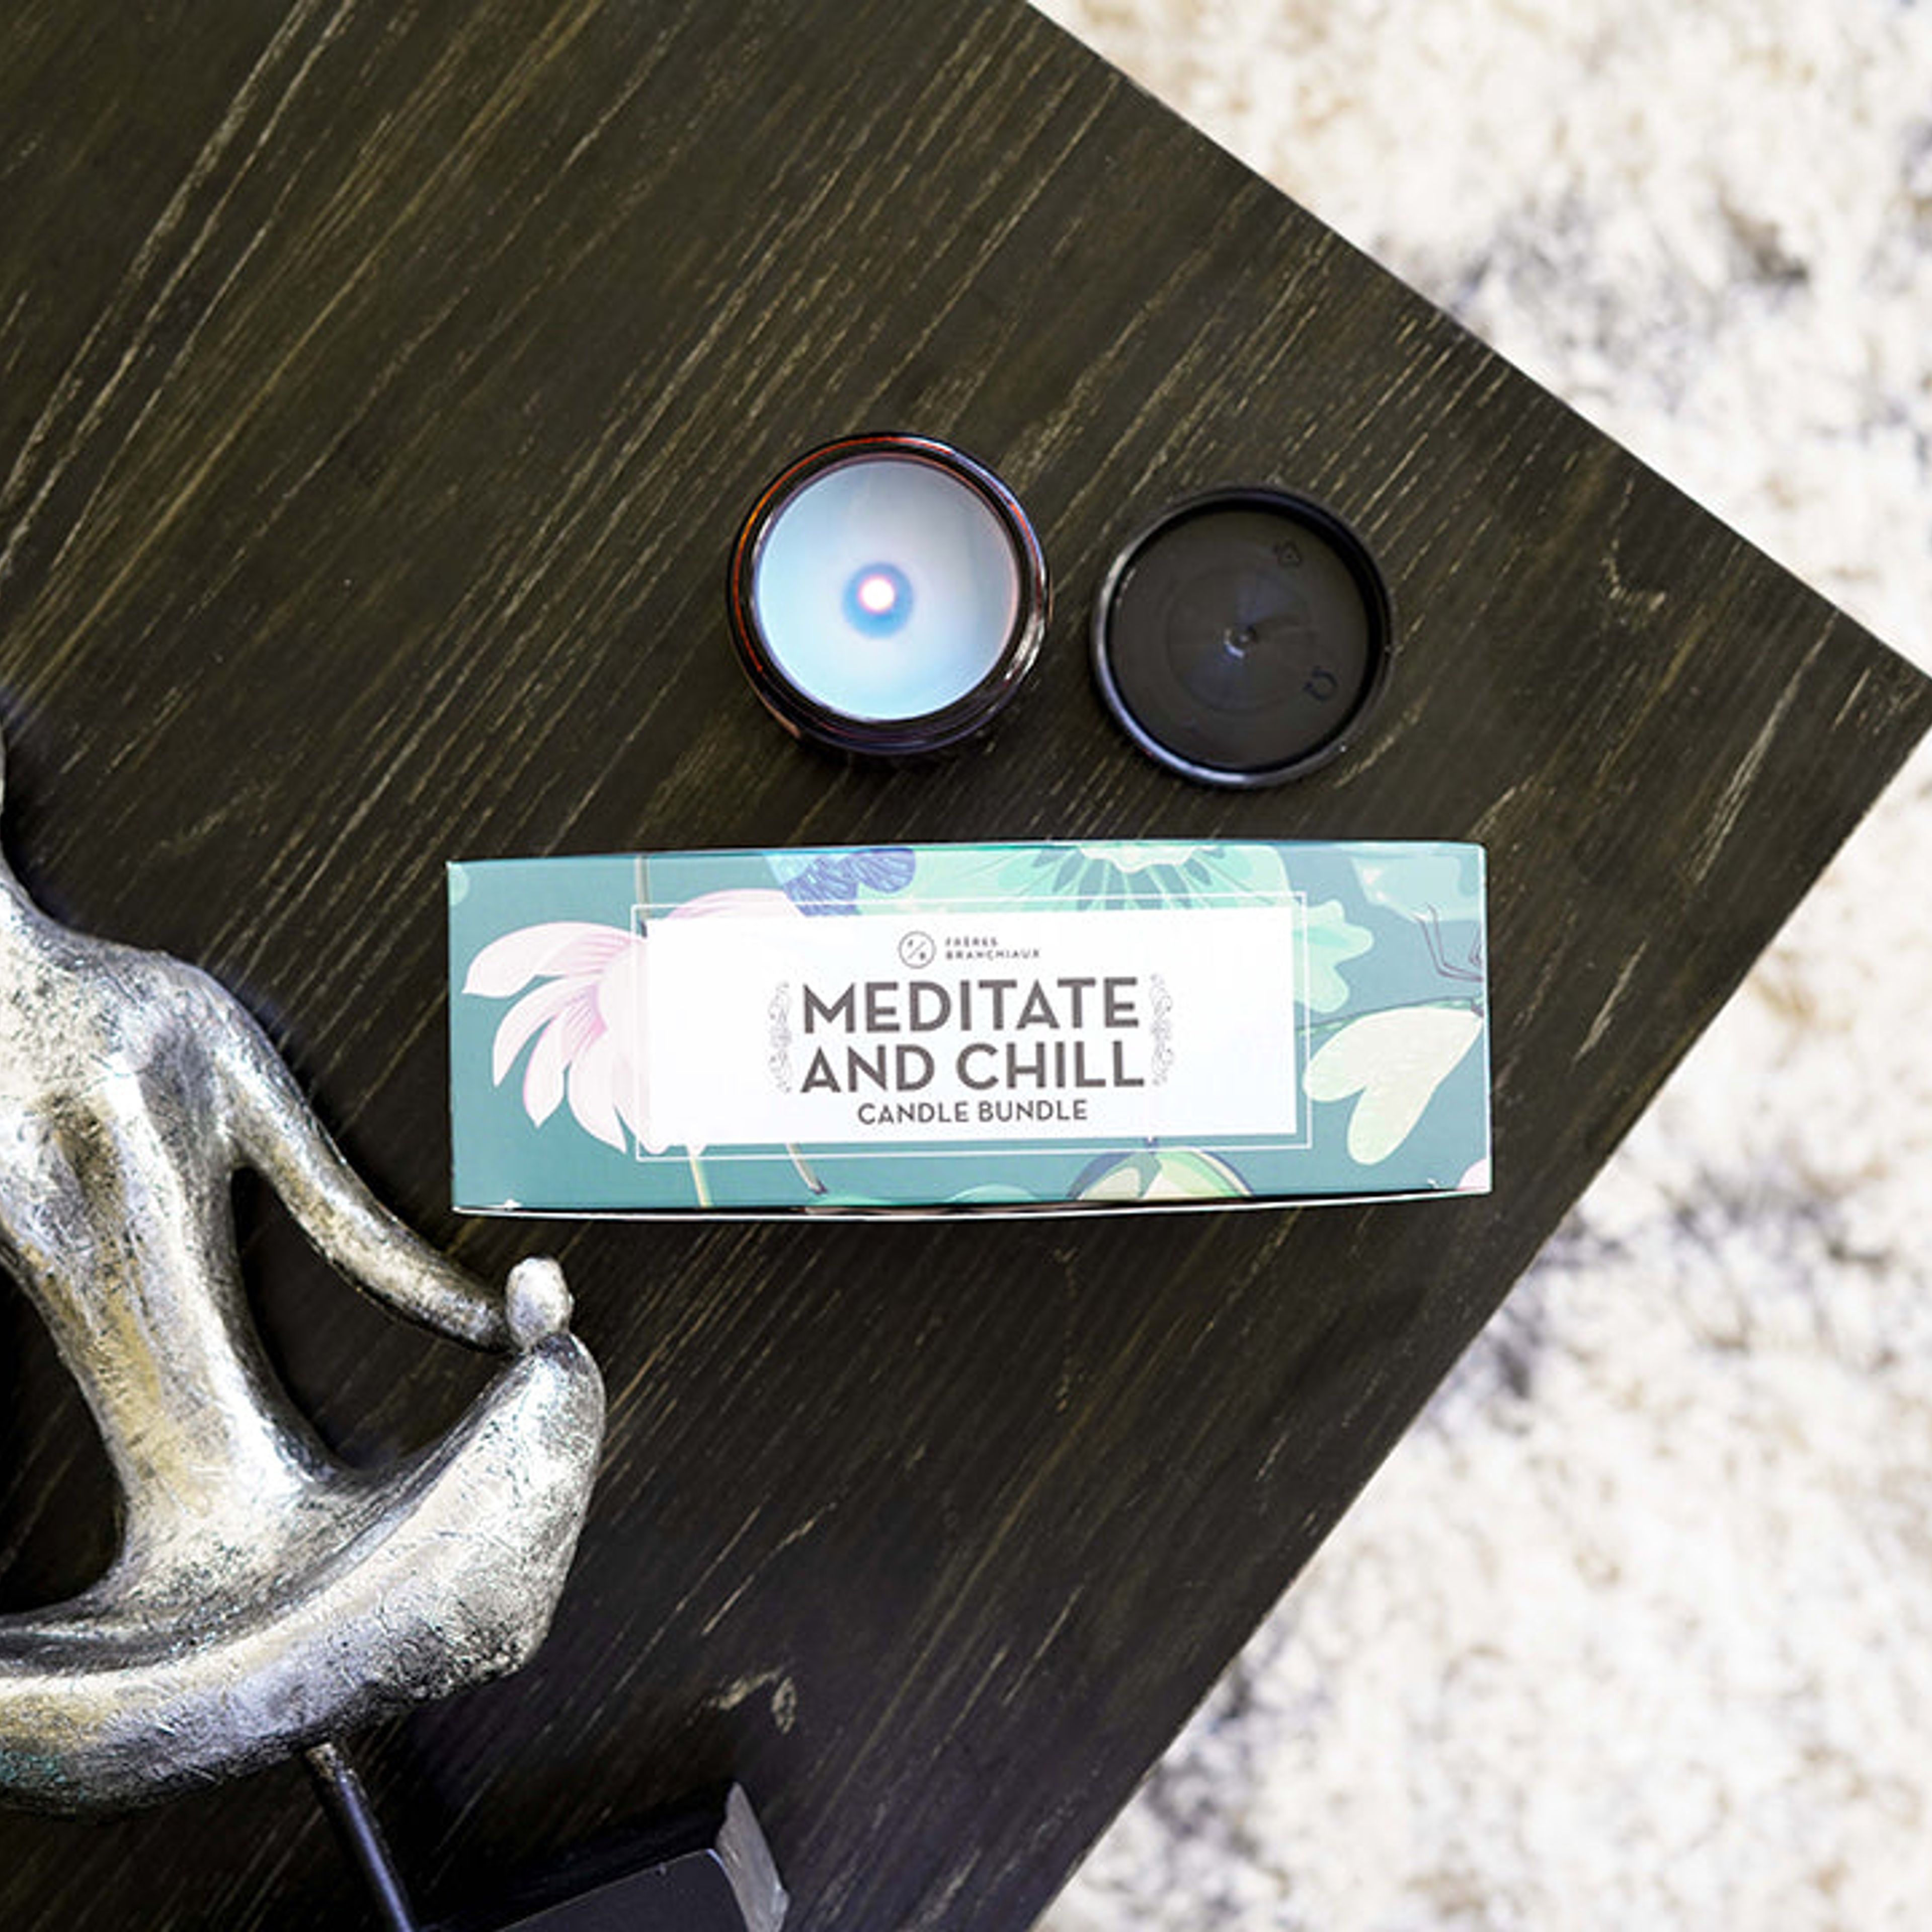 Meditate and Chill Candle Bundle